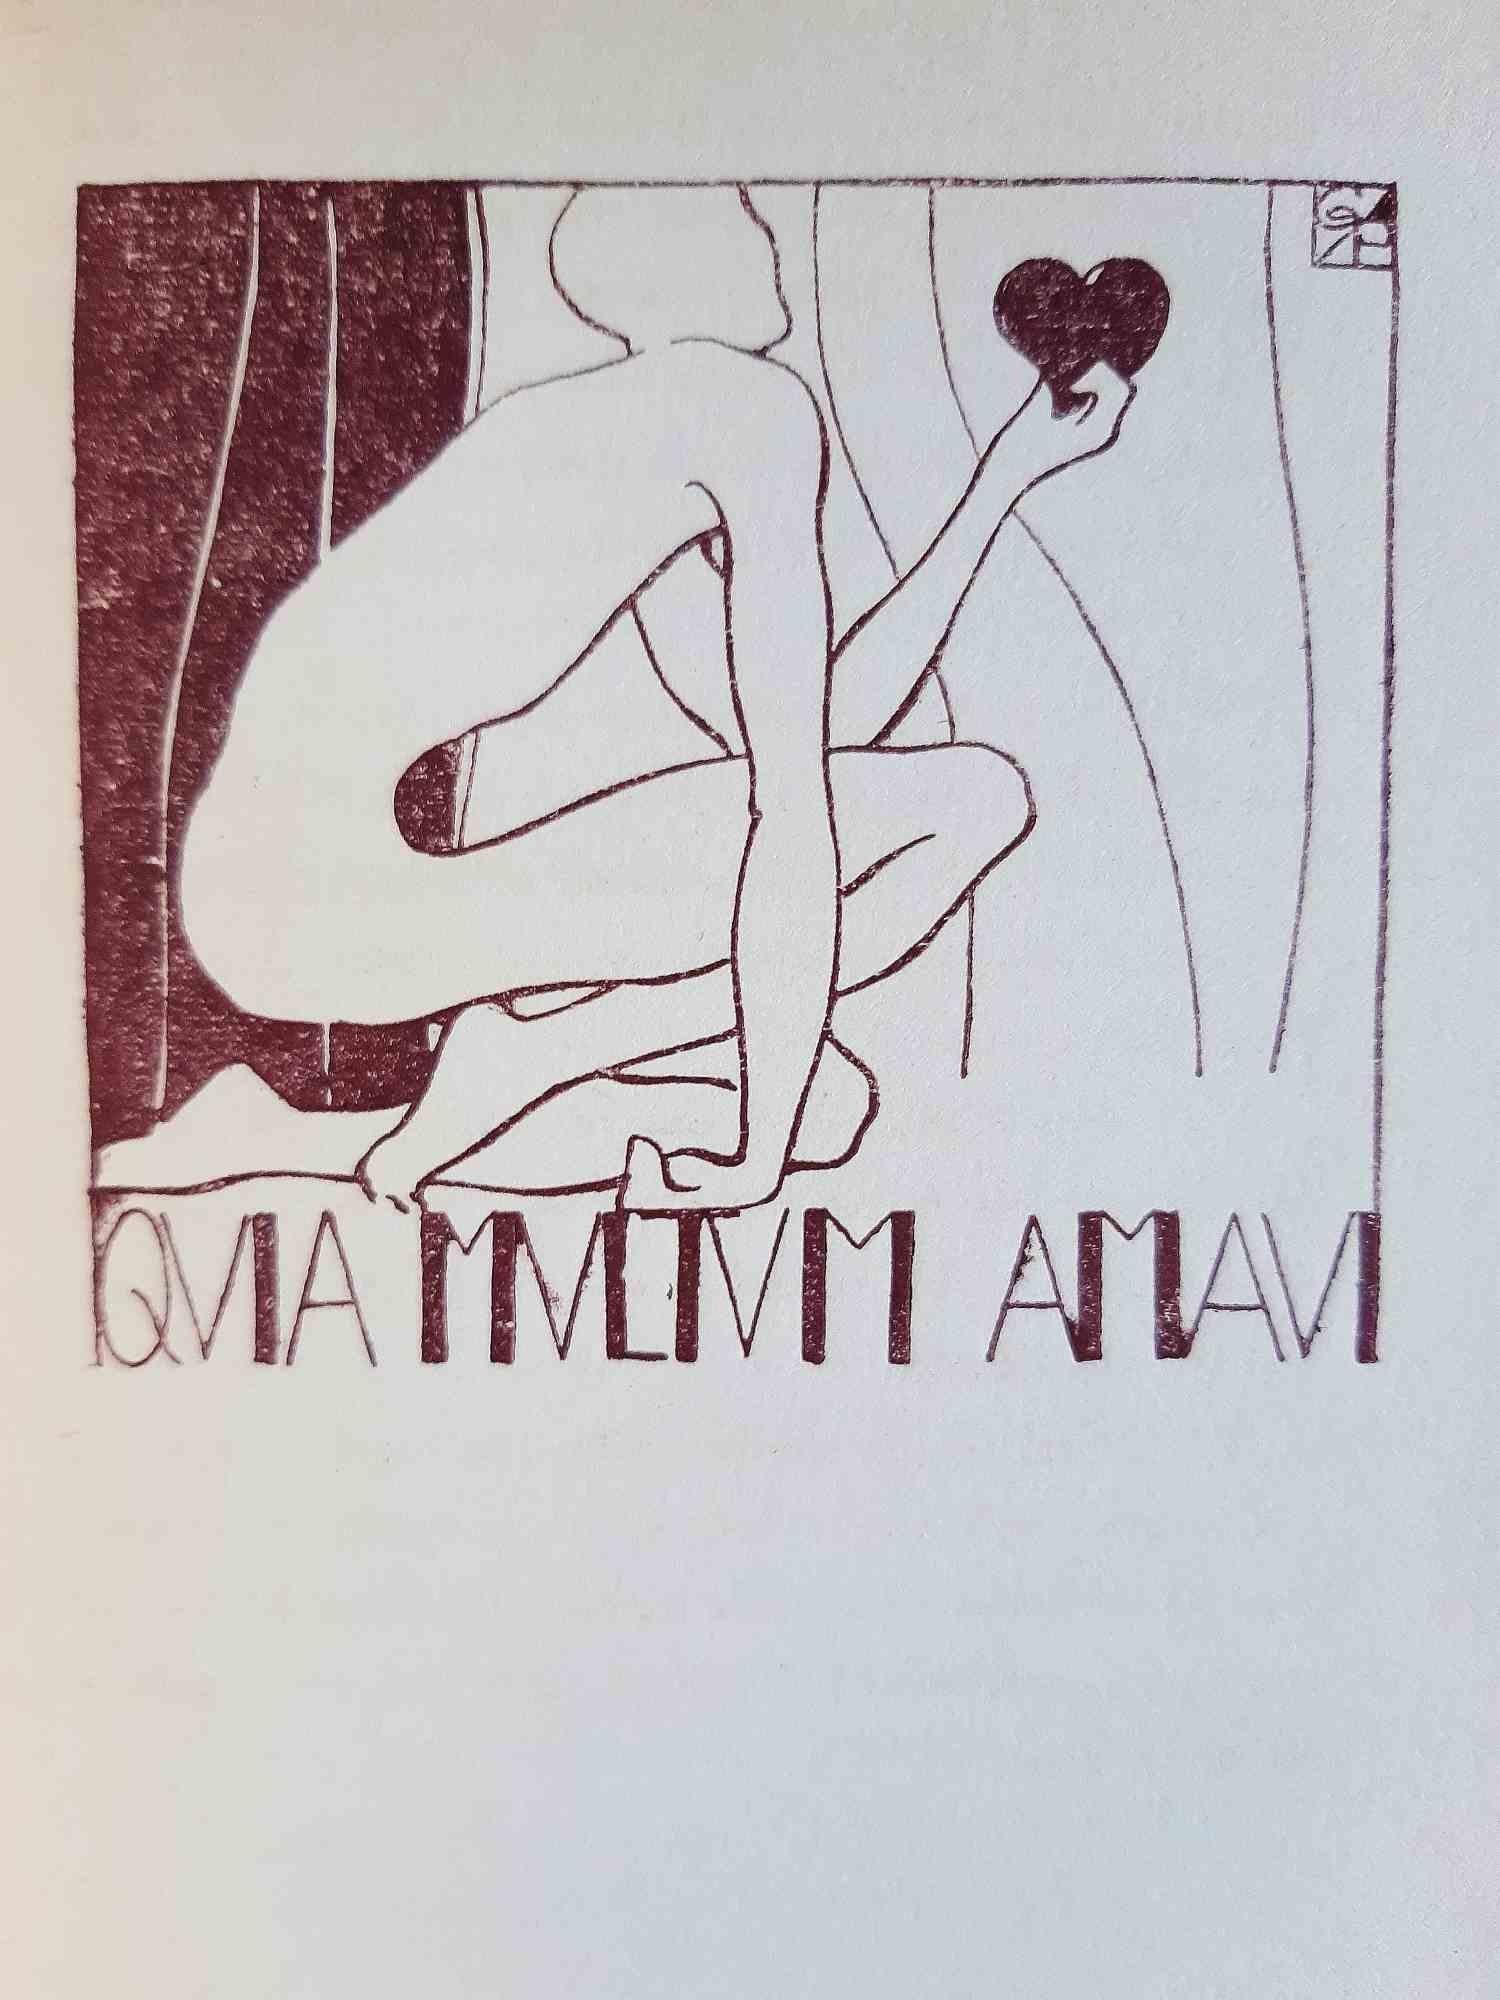 La Casa della Cortigiana is an original Rare Book written by Oscar Wilde in 1920 and illustrated by Gio Ponti (Milan, 18 November 1891 - Milan, 16 September 1979).

Original Edition.

Published by Modernissima, Milan.

Format: in 16°. The dimensions